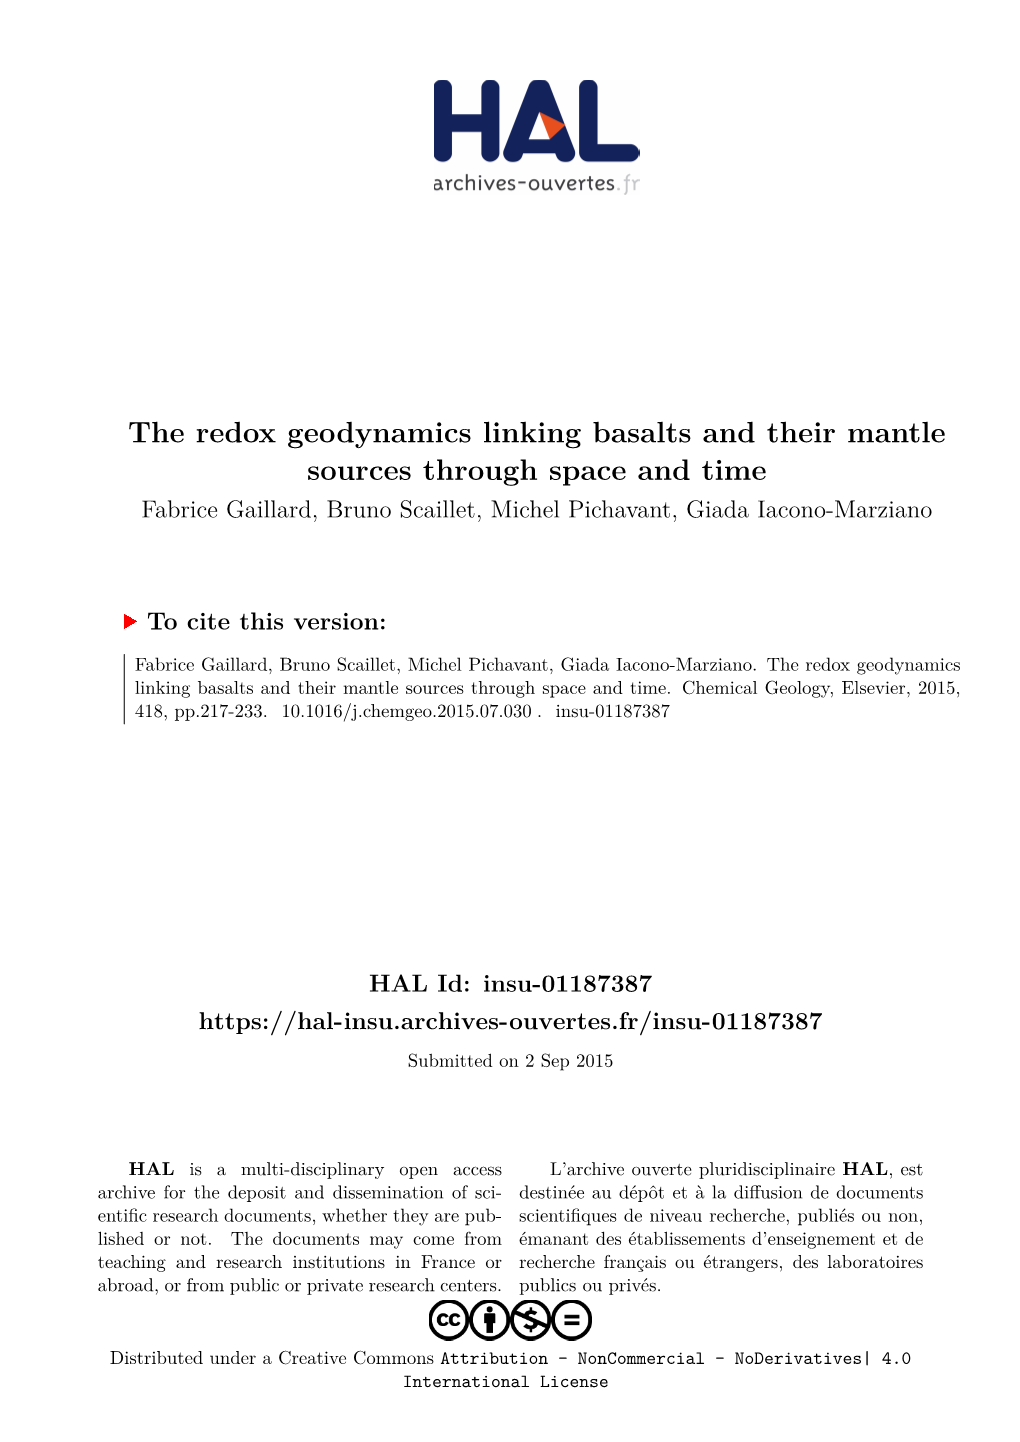 The Redox Geodynamics Linking Basalts and Their Mantle Sources Through Space and Time Fabrice Gaillard, Bruno Scaillet, Michel Pichavant, Giada Iacono-Marziano